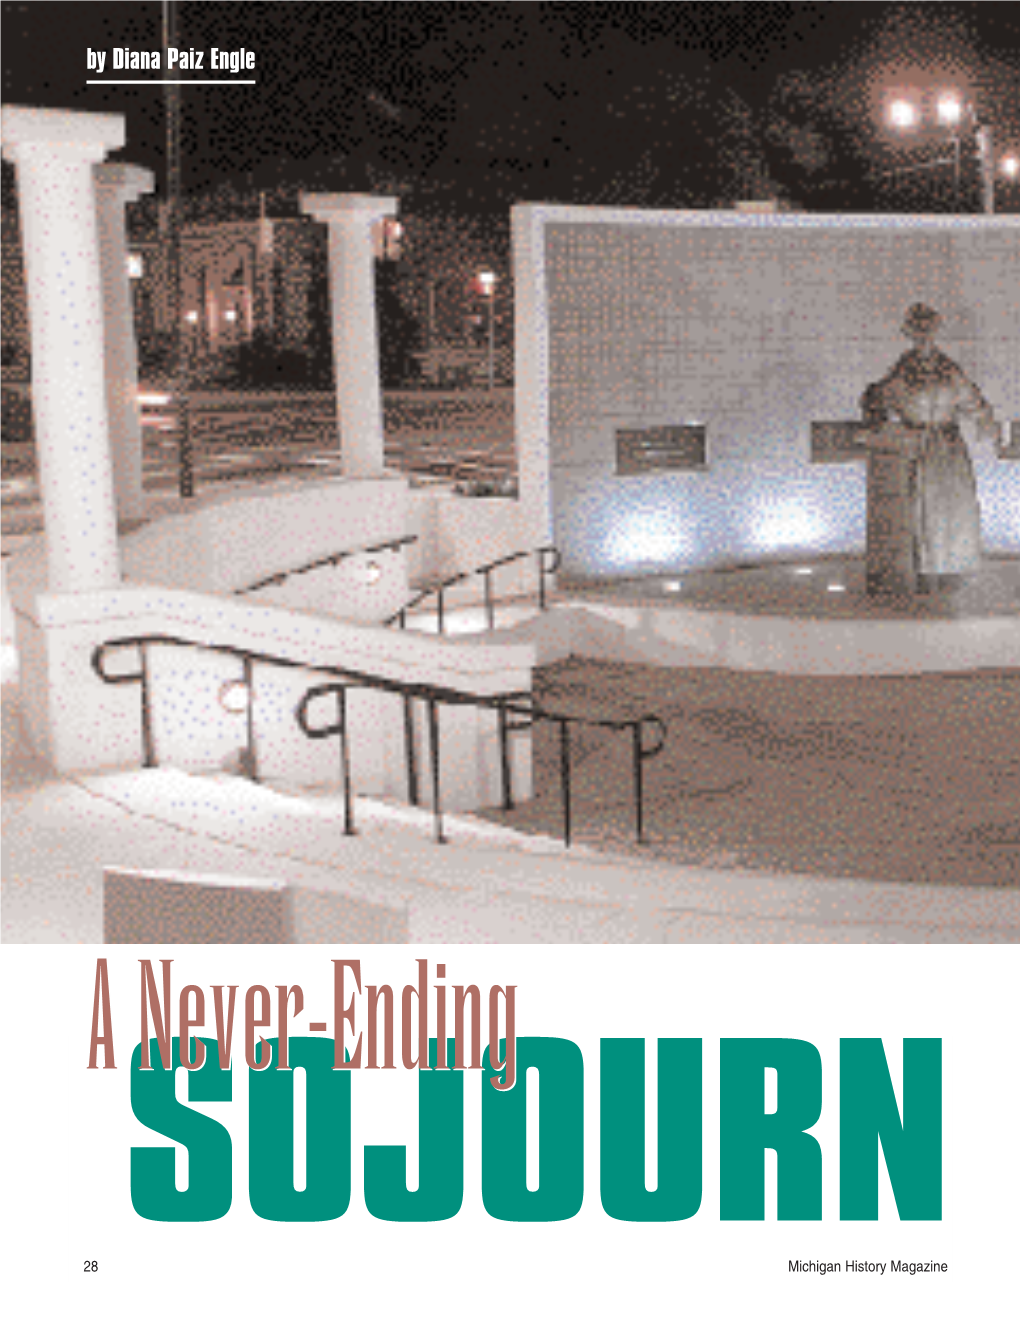 A Never-Ending Sojourn by Diana Paiz Engle